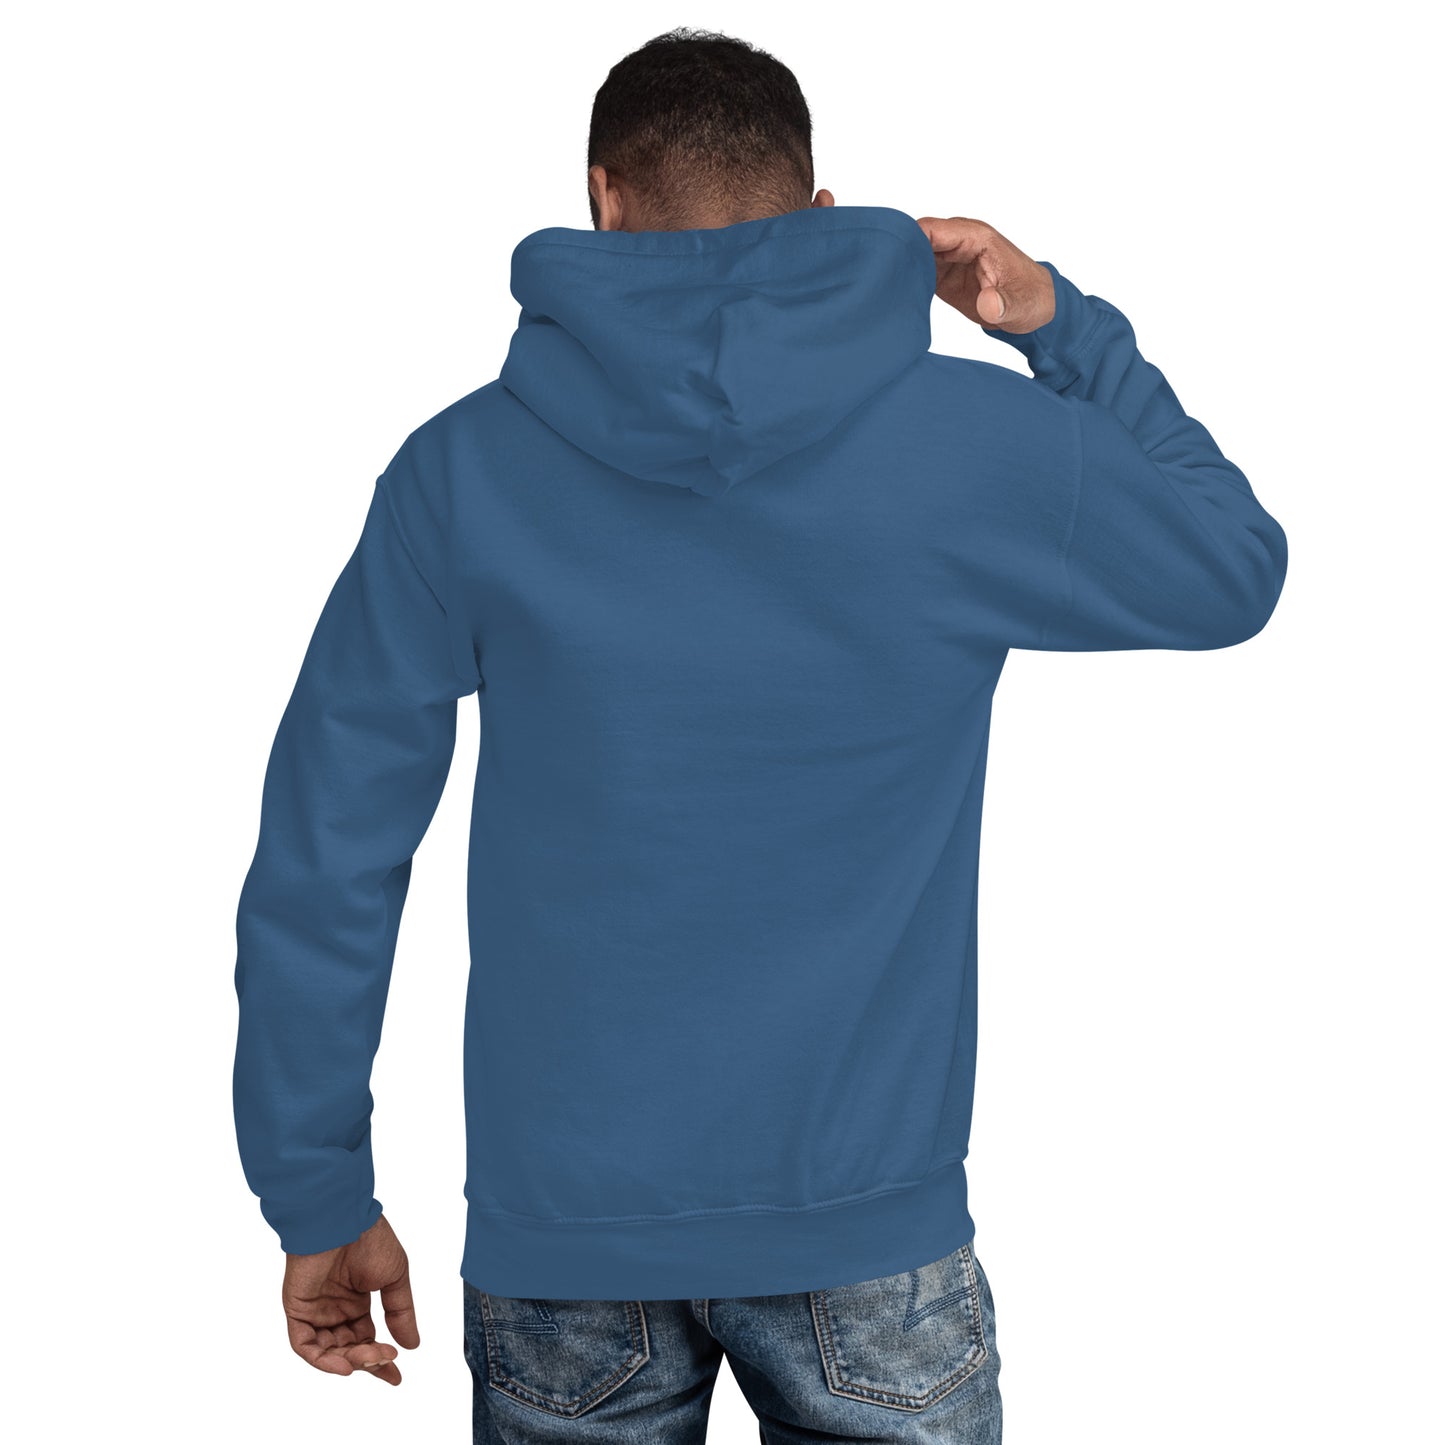 "Moravian Workbench Elevation" Unisex Hoodie for Woodworkers (Multiple Colors)